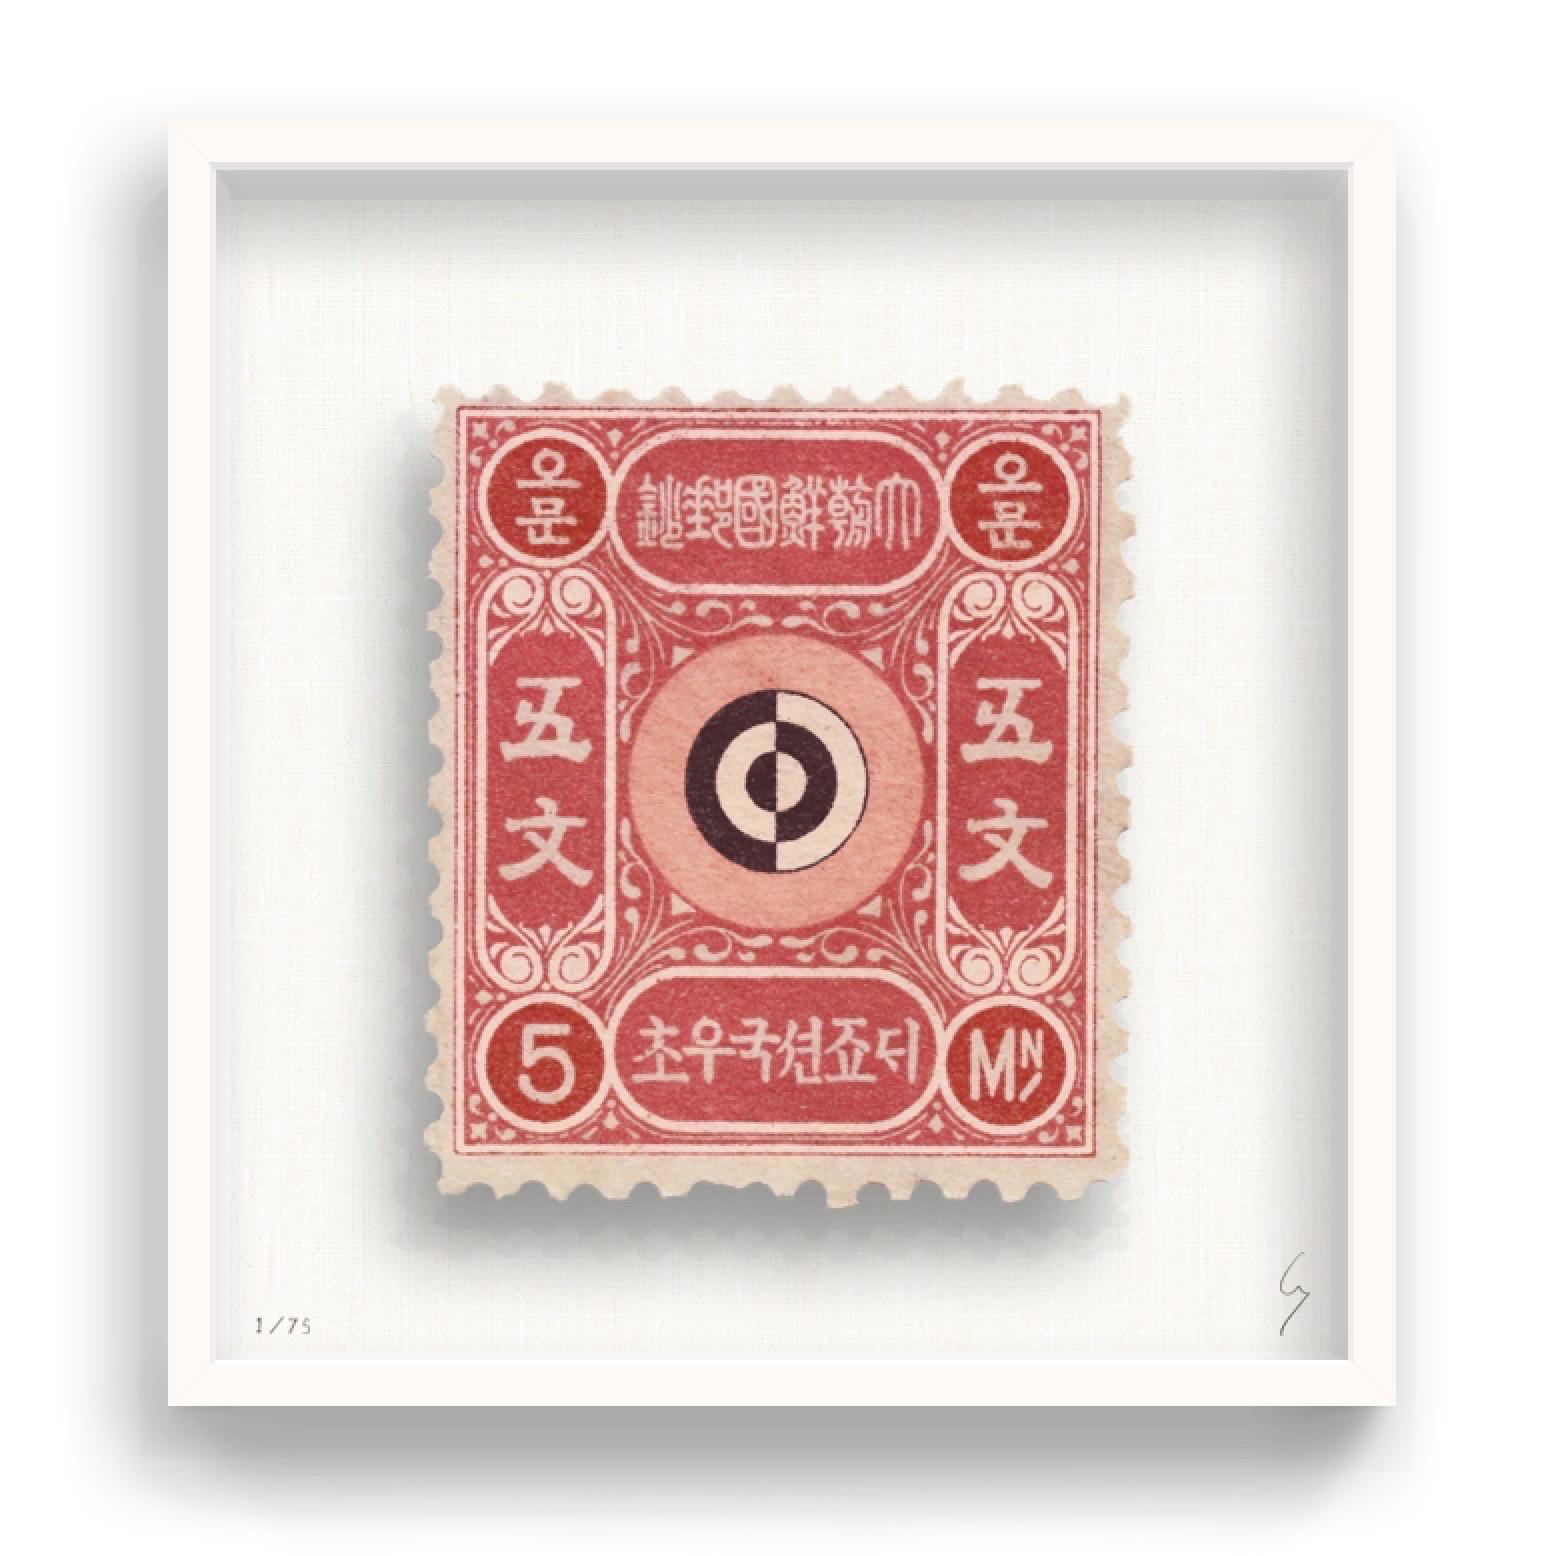 Guy Gee, Korea (medium)

Hand-engraved print on 350gsm on G.F Smith card
53 x 56cm (20 4/5 x 22 2/5 in)
Frame included 
Edition of 75 

Each artwork by Guy had been digitally reimagined from an original postage stamp. Cut out and finished by hand,